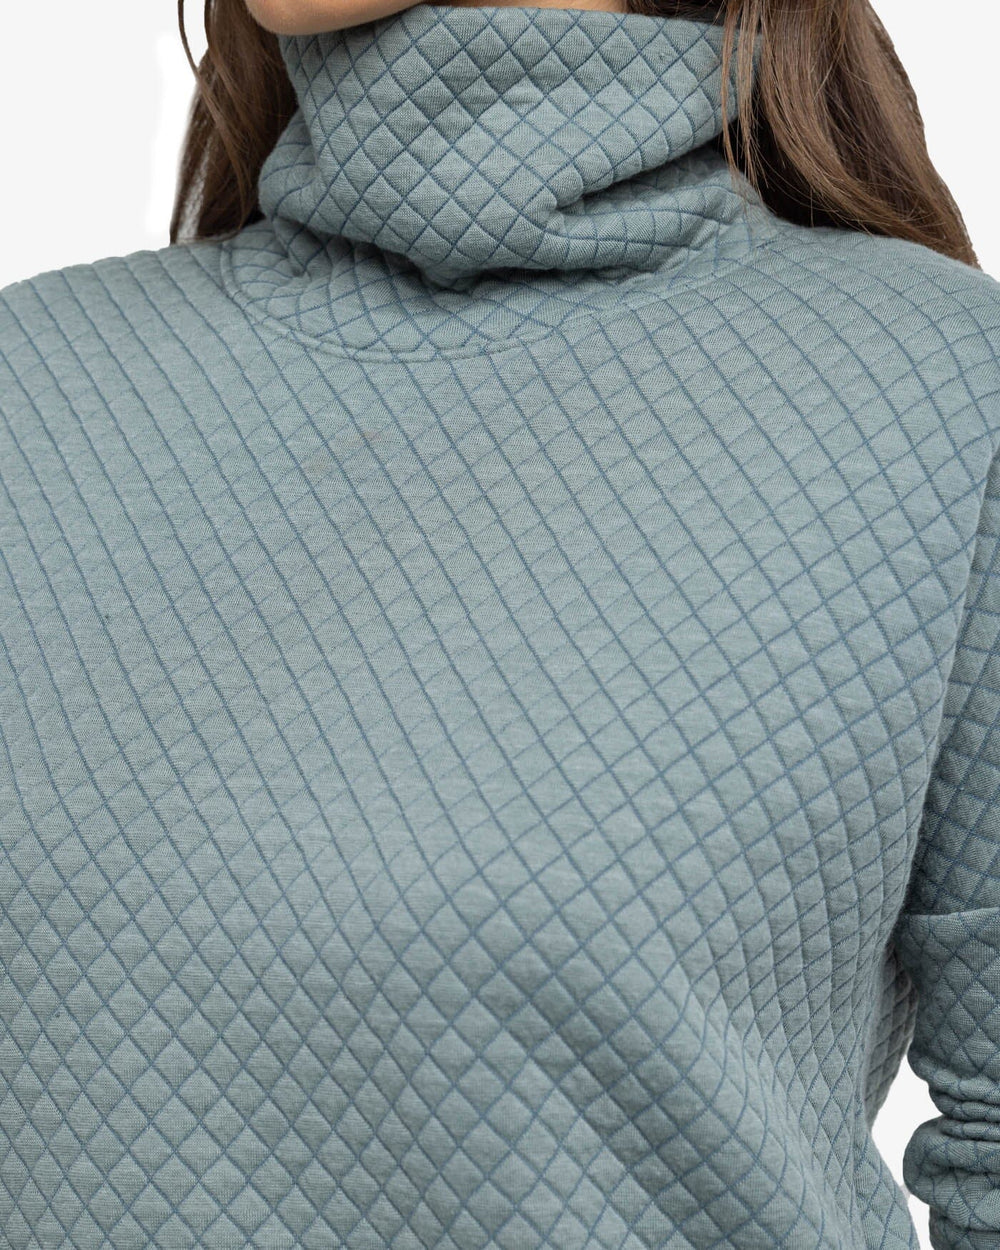 The detail view of the Southern Tide Mellie MockNeck Sweatshirt by Southern Tide - Balsam Green